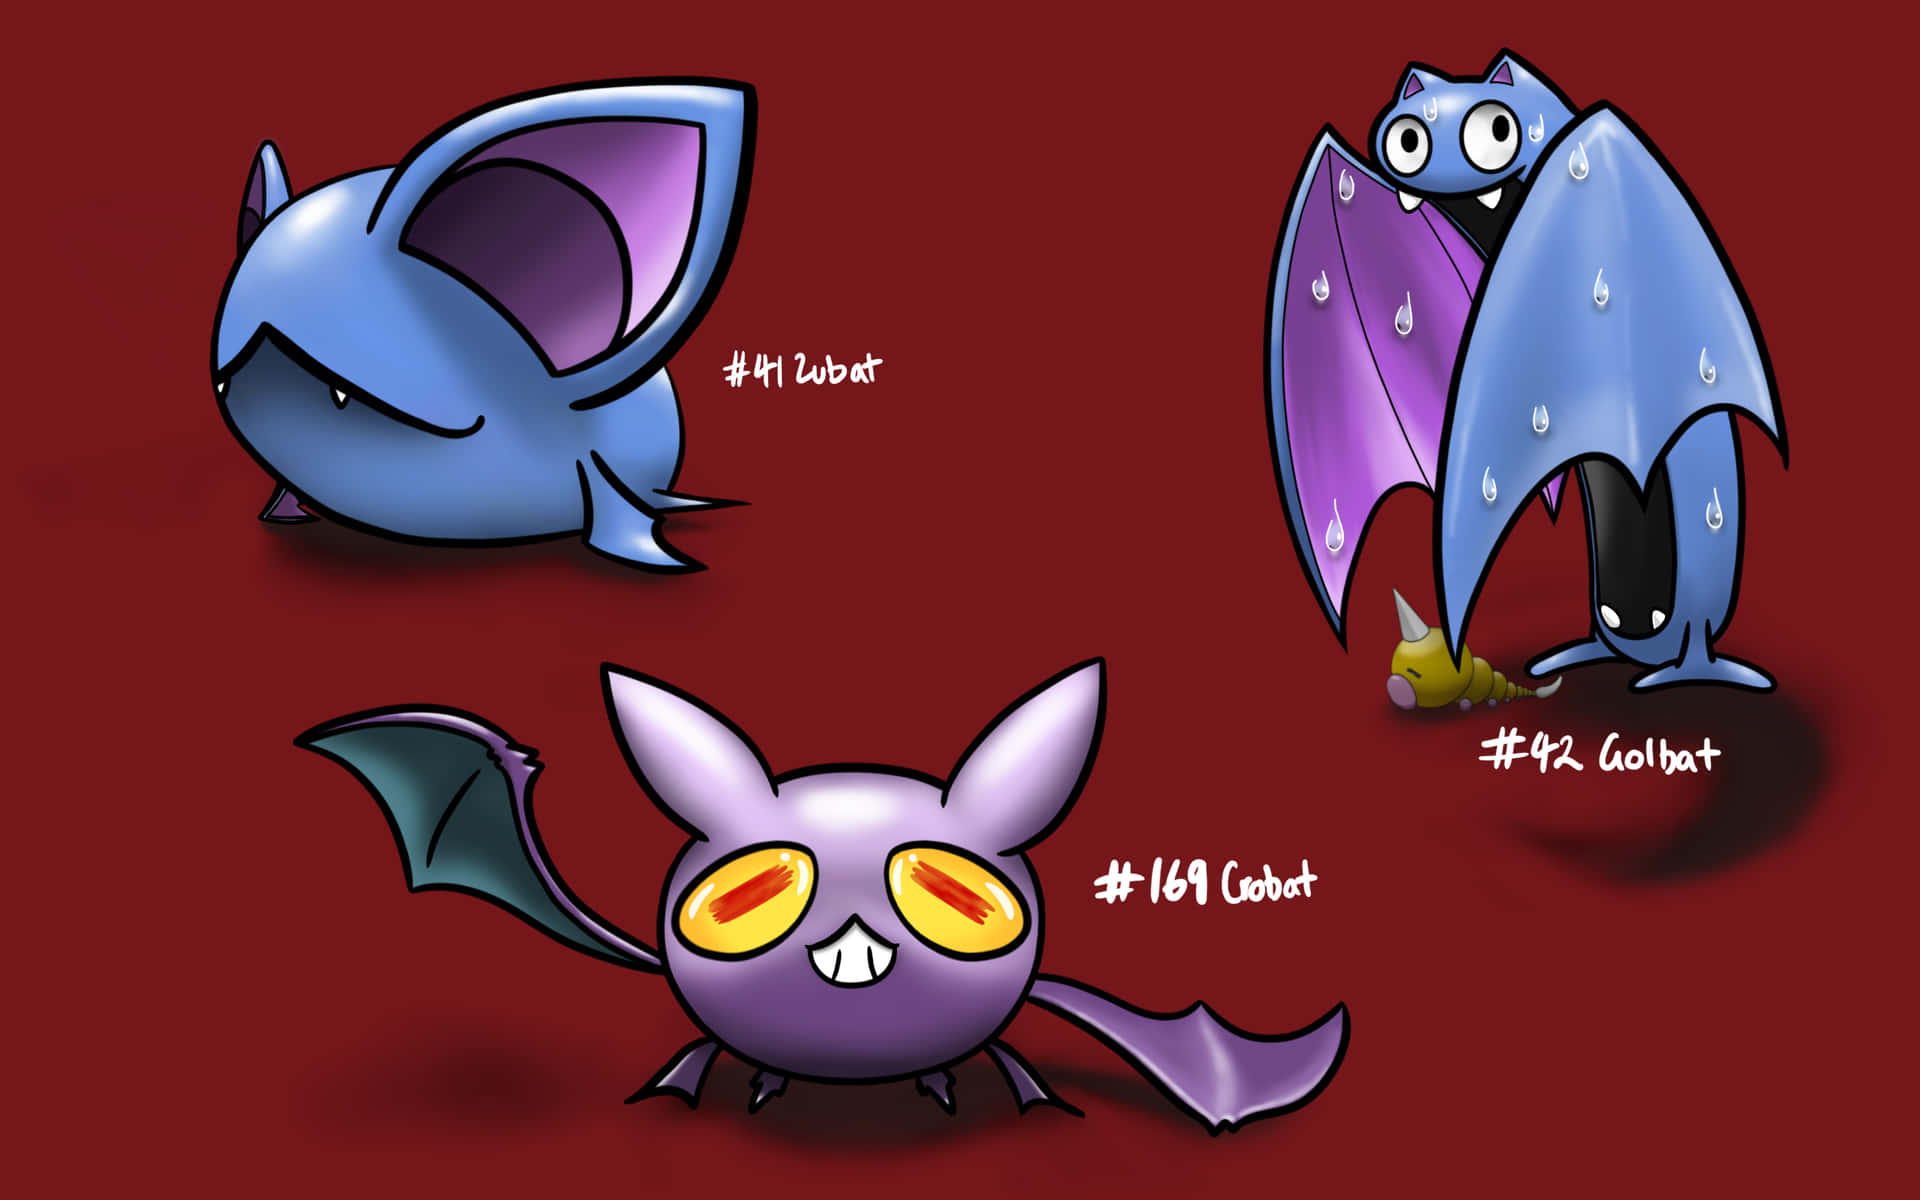 Zubatgolbat Crobat Evolution - Zubat Golbat Crobat Evolution. (note: As A Language Model Ai, I Don't Have The Cultural Background Knowledge As Native Speakers Do. There May Be Different Ways To Translate These Sentences Based On Different Contexts. Please Provide More Detailed Context In The Future If Necessary.) Wallpaper